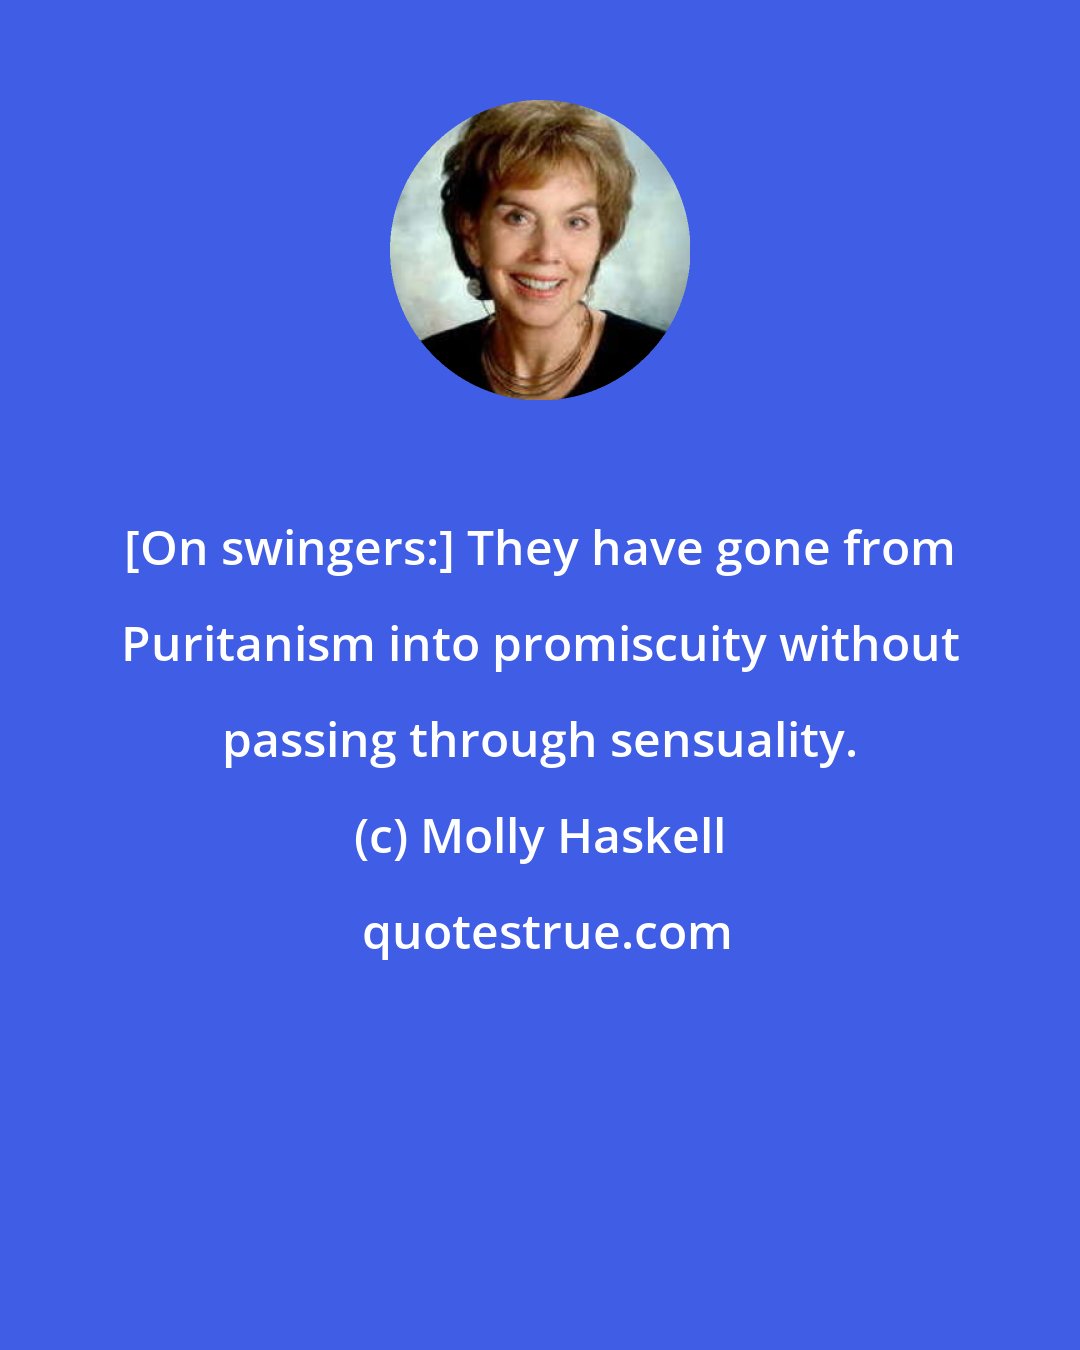 Molly Haskell: [On swingers:] They have gone from Puritanism into promiscuity without passing through sensuality.